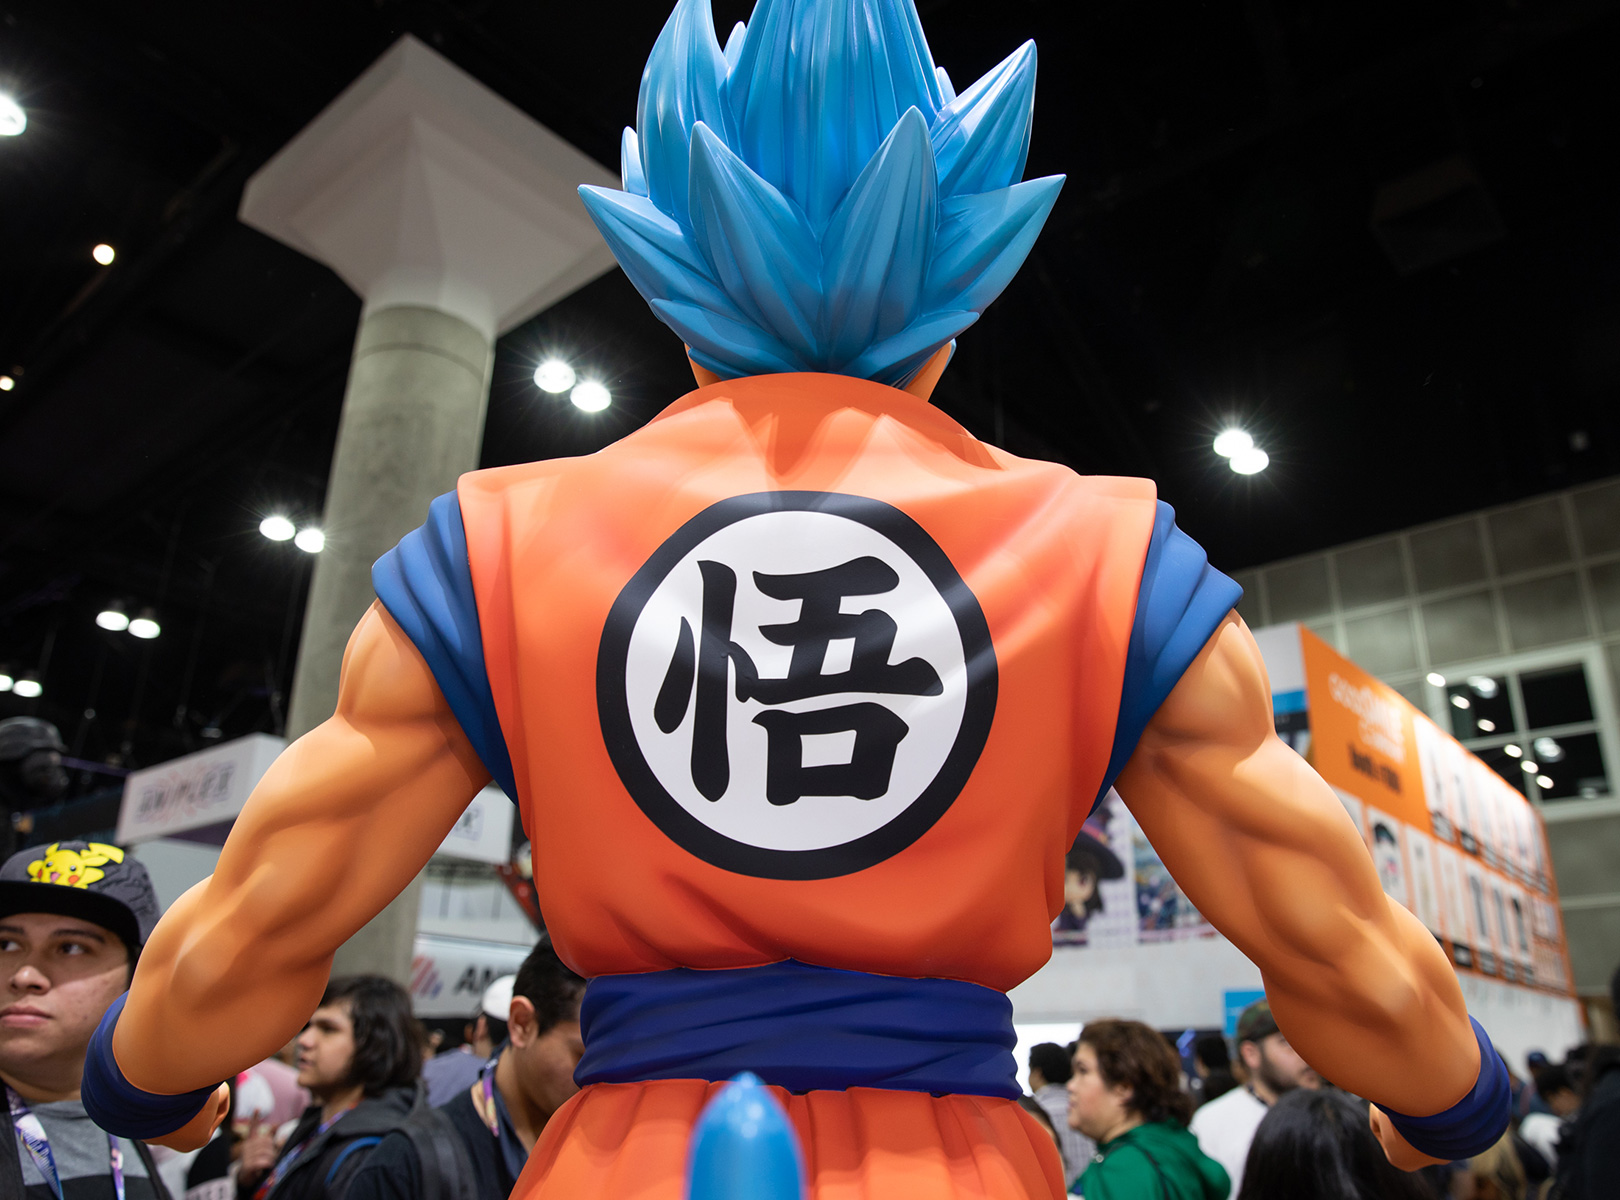 CRUNCHYROLL EXPO 2019 IS UPON US!